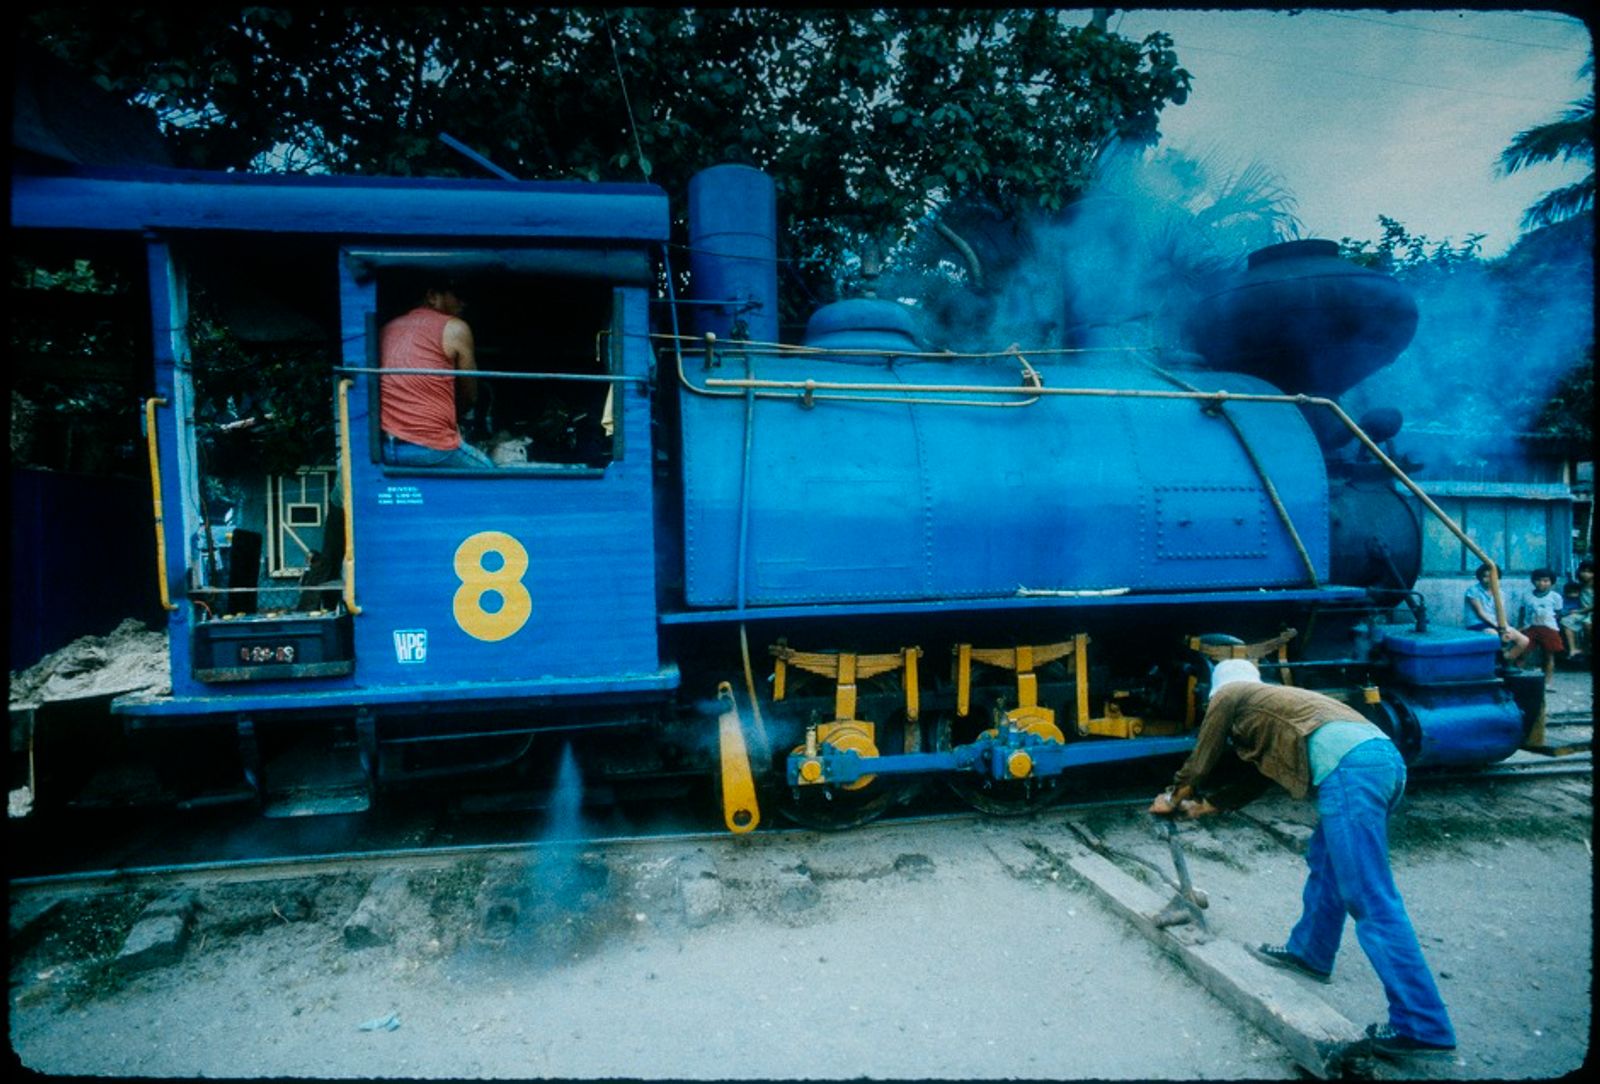 © Hartmut Schwarzbach - Image from the The Steam Trains of Hawaiian Philippine Sugar Company  photography project